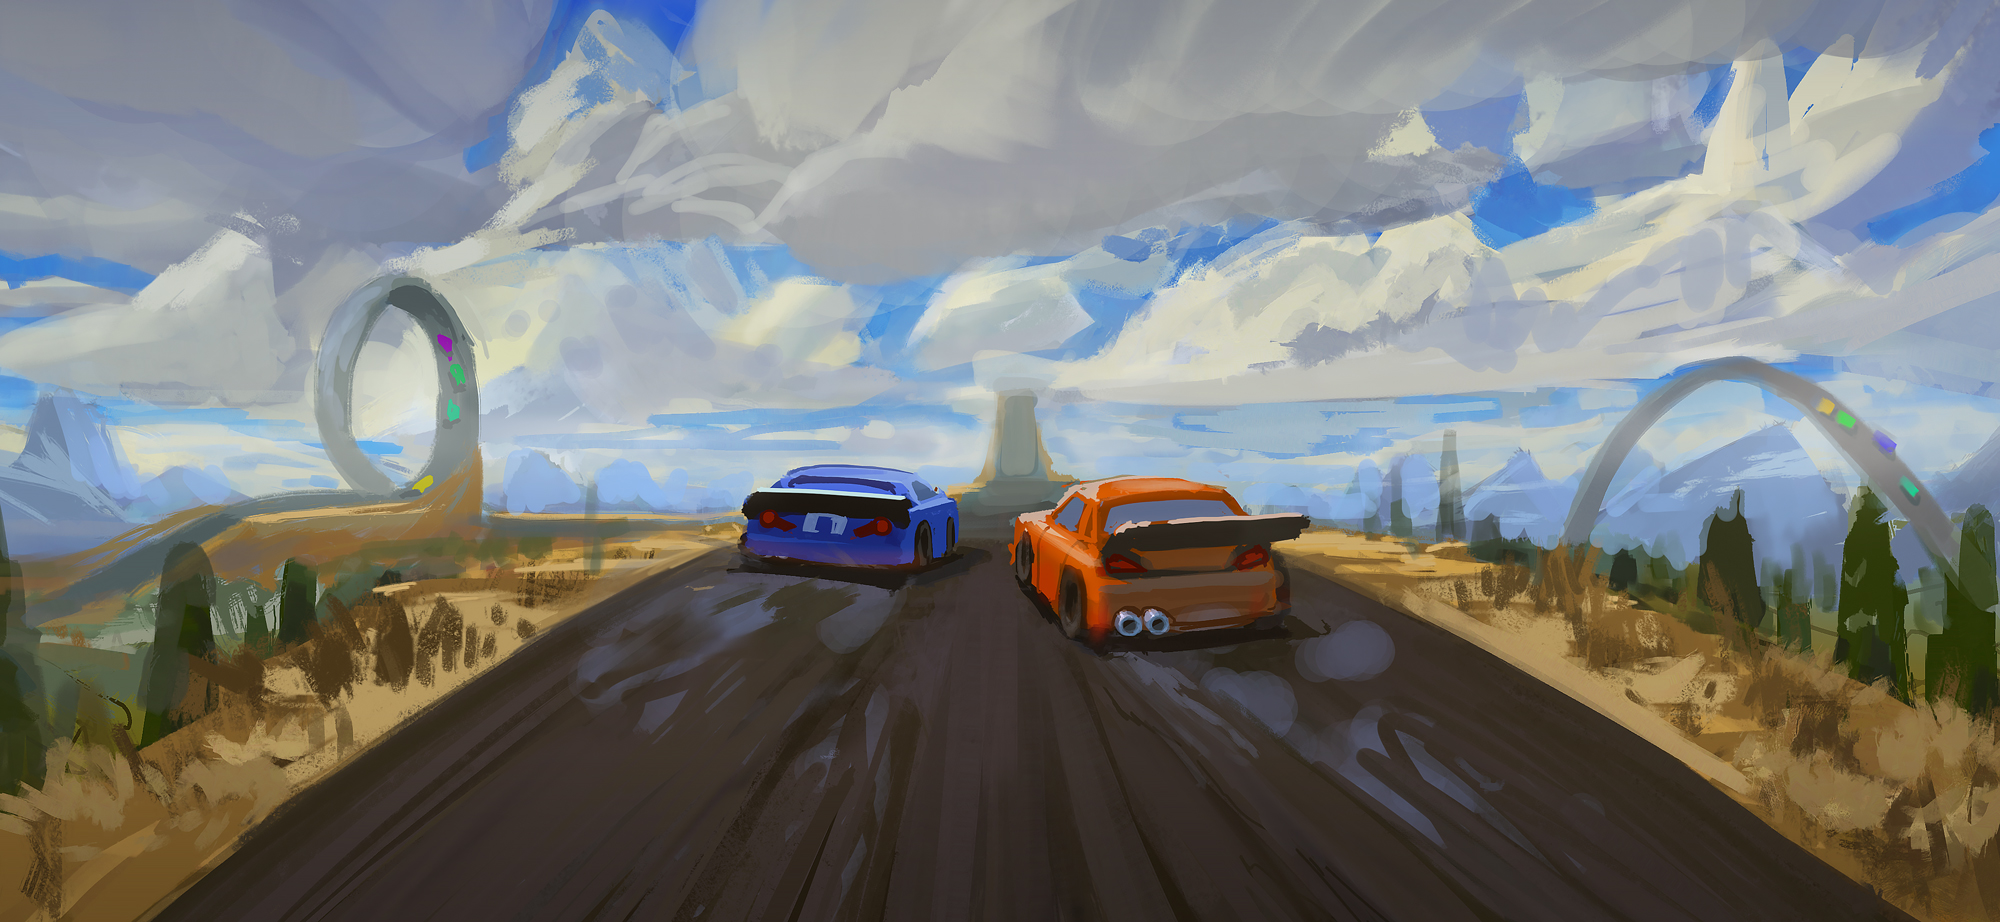 clouds_and_cars1.jpg